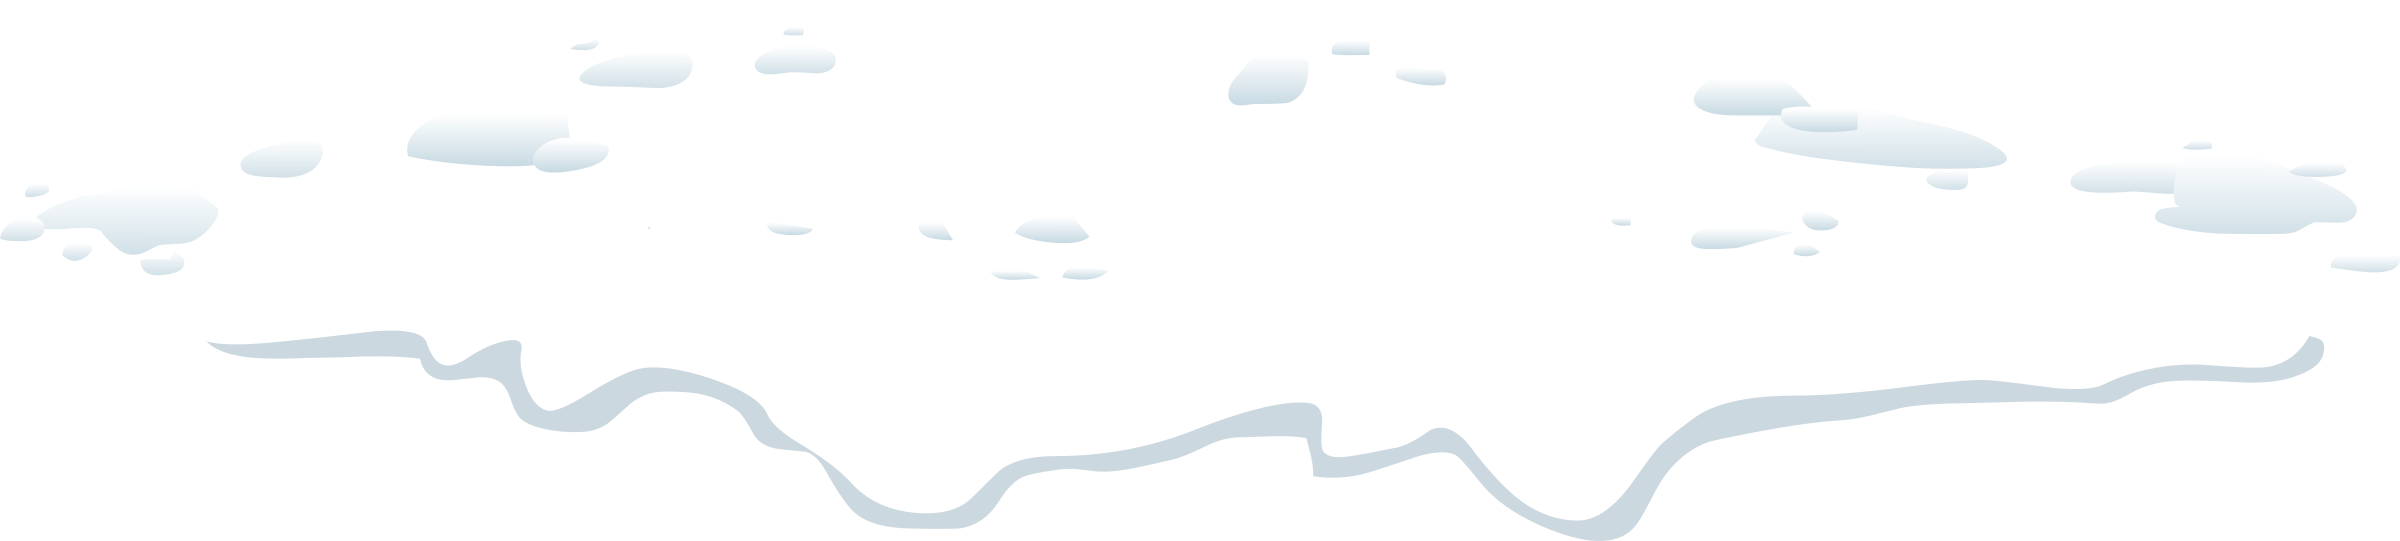  collection of snowy. Hunting clipart landscape